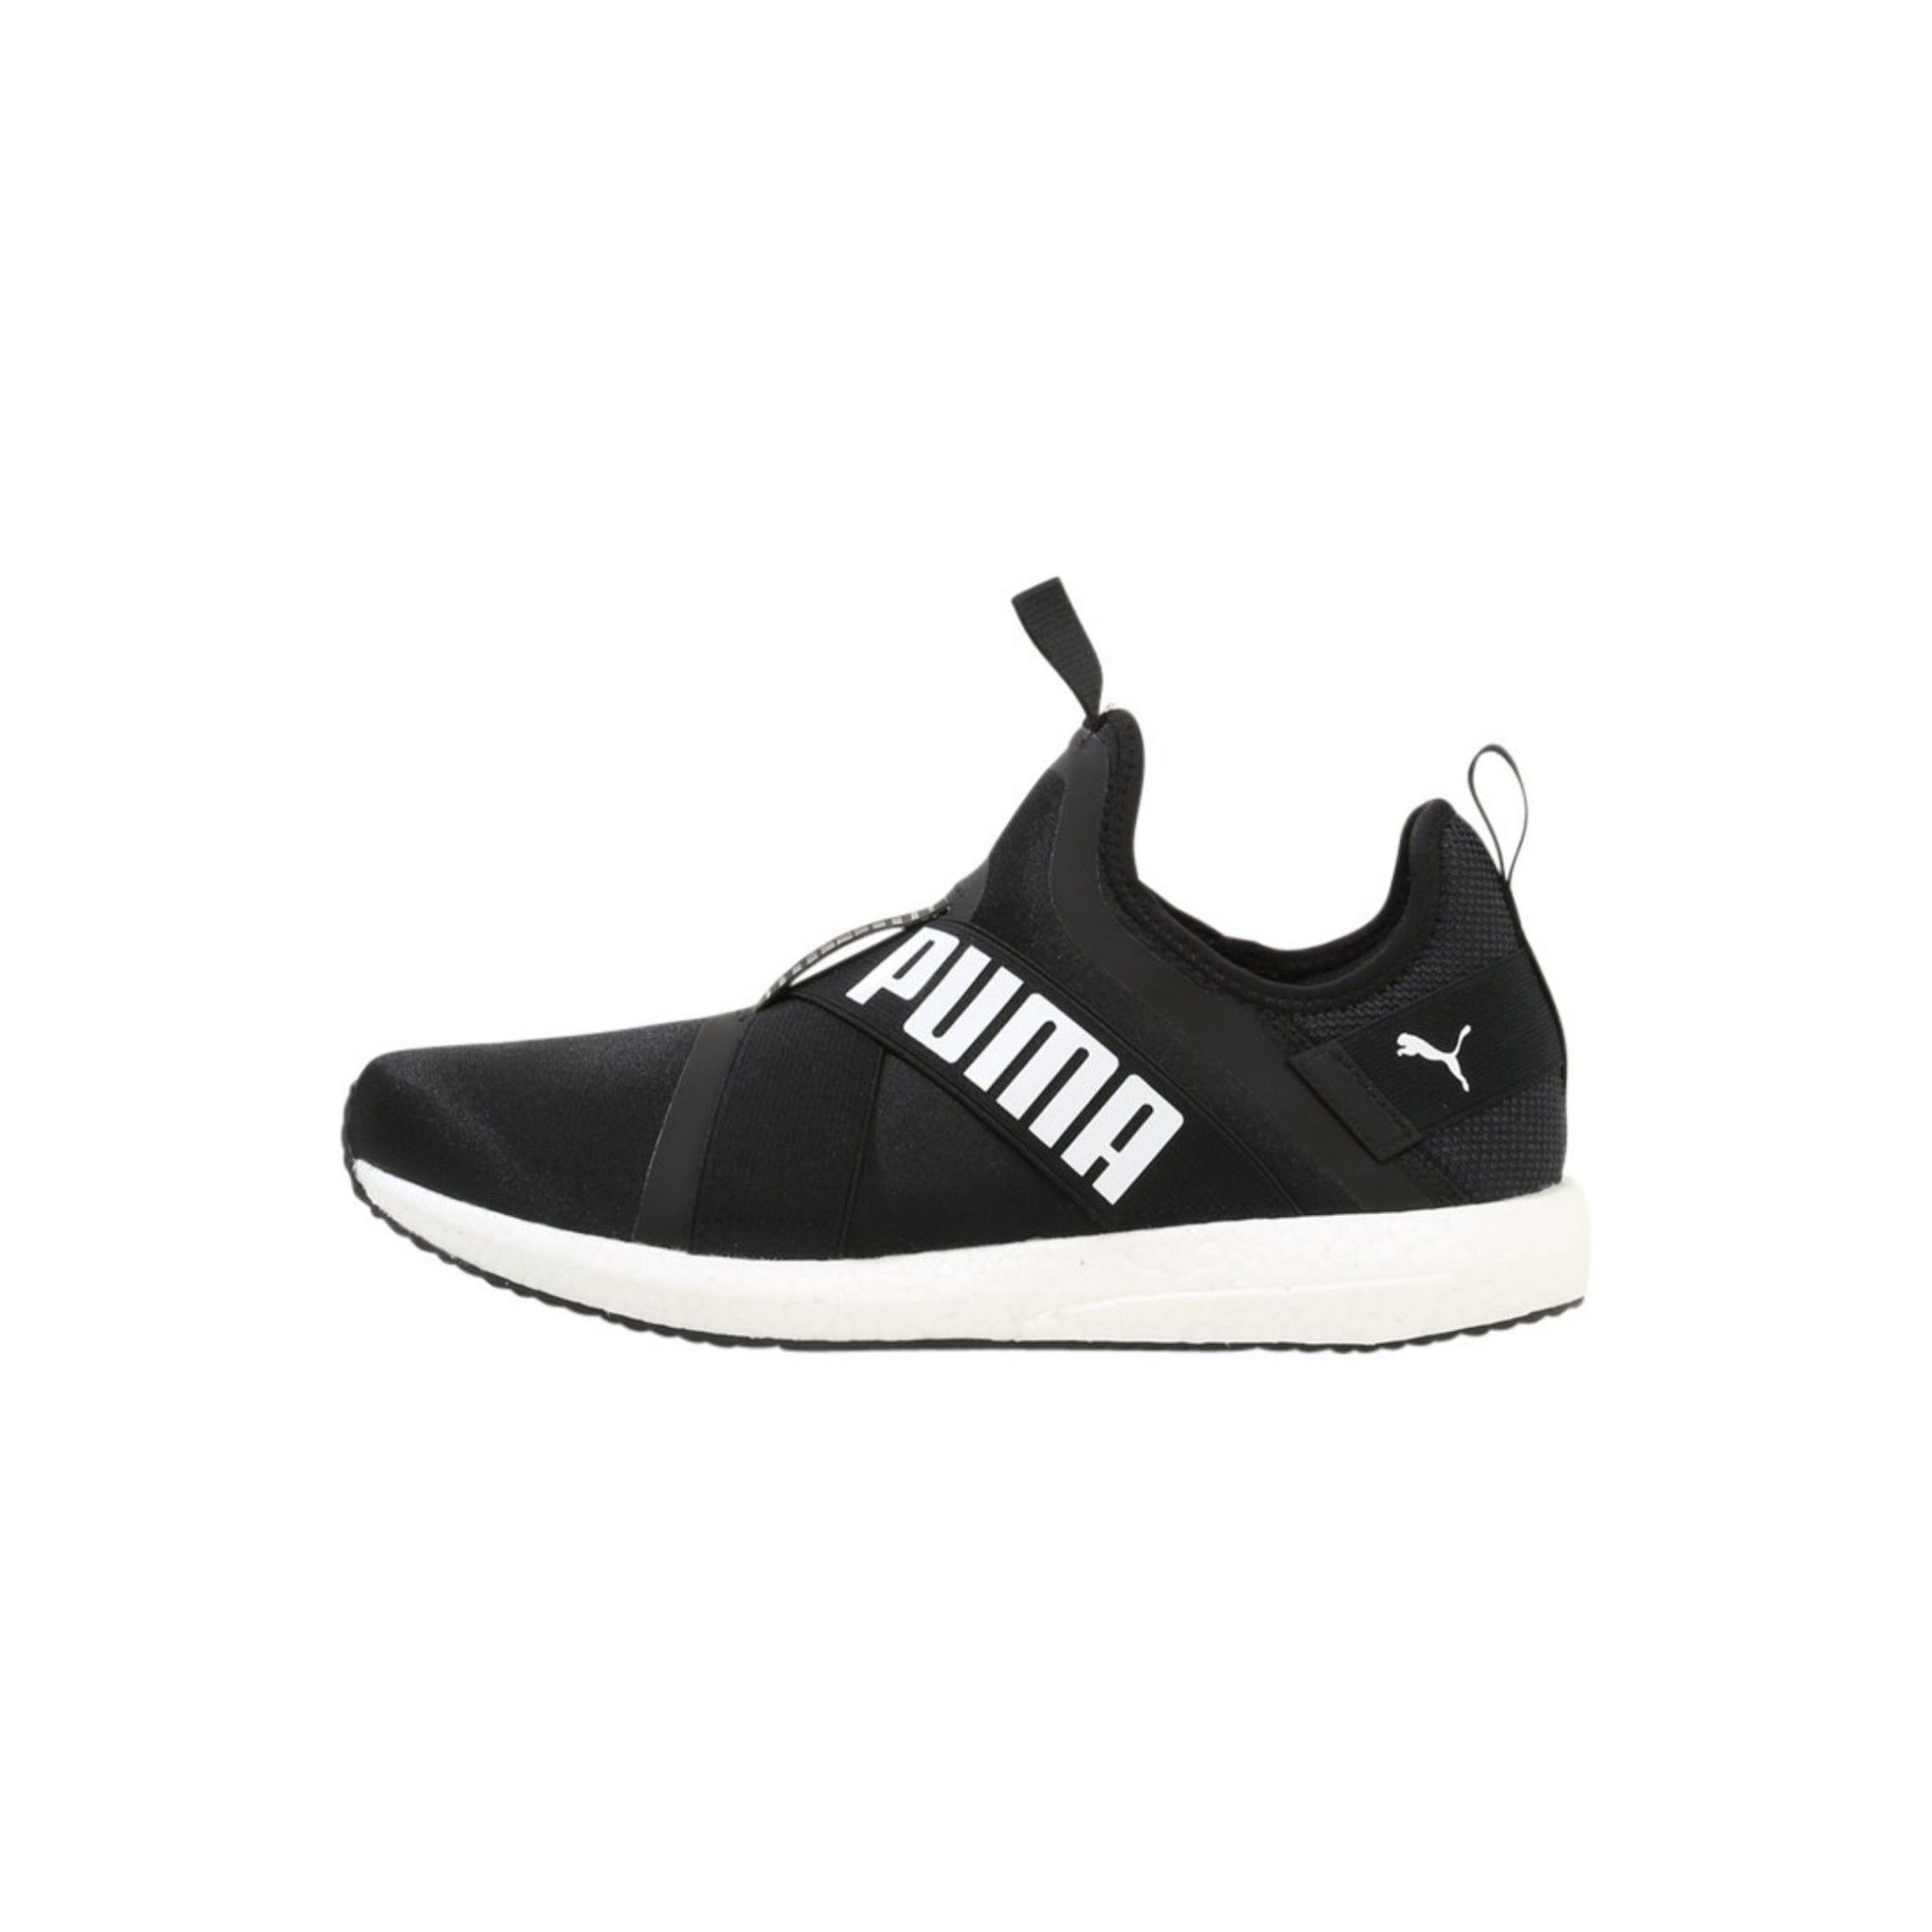 Europe City Bloodstained Puma Mega NRGY X Black Running Shoes - Buy Puma Mega NRGY X Black Running  Shoes Online at Best Prices in India on Snapdeal